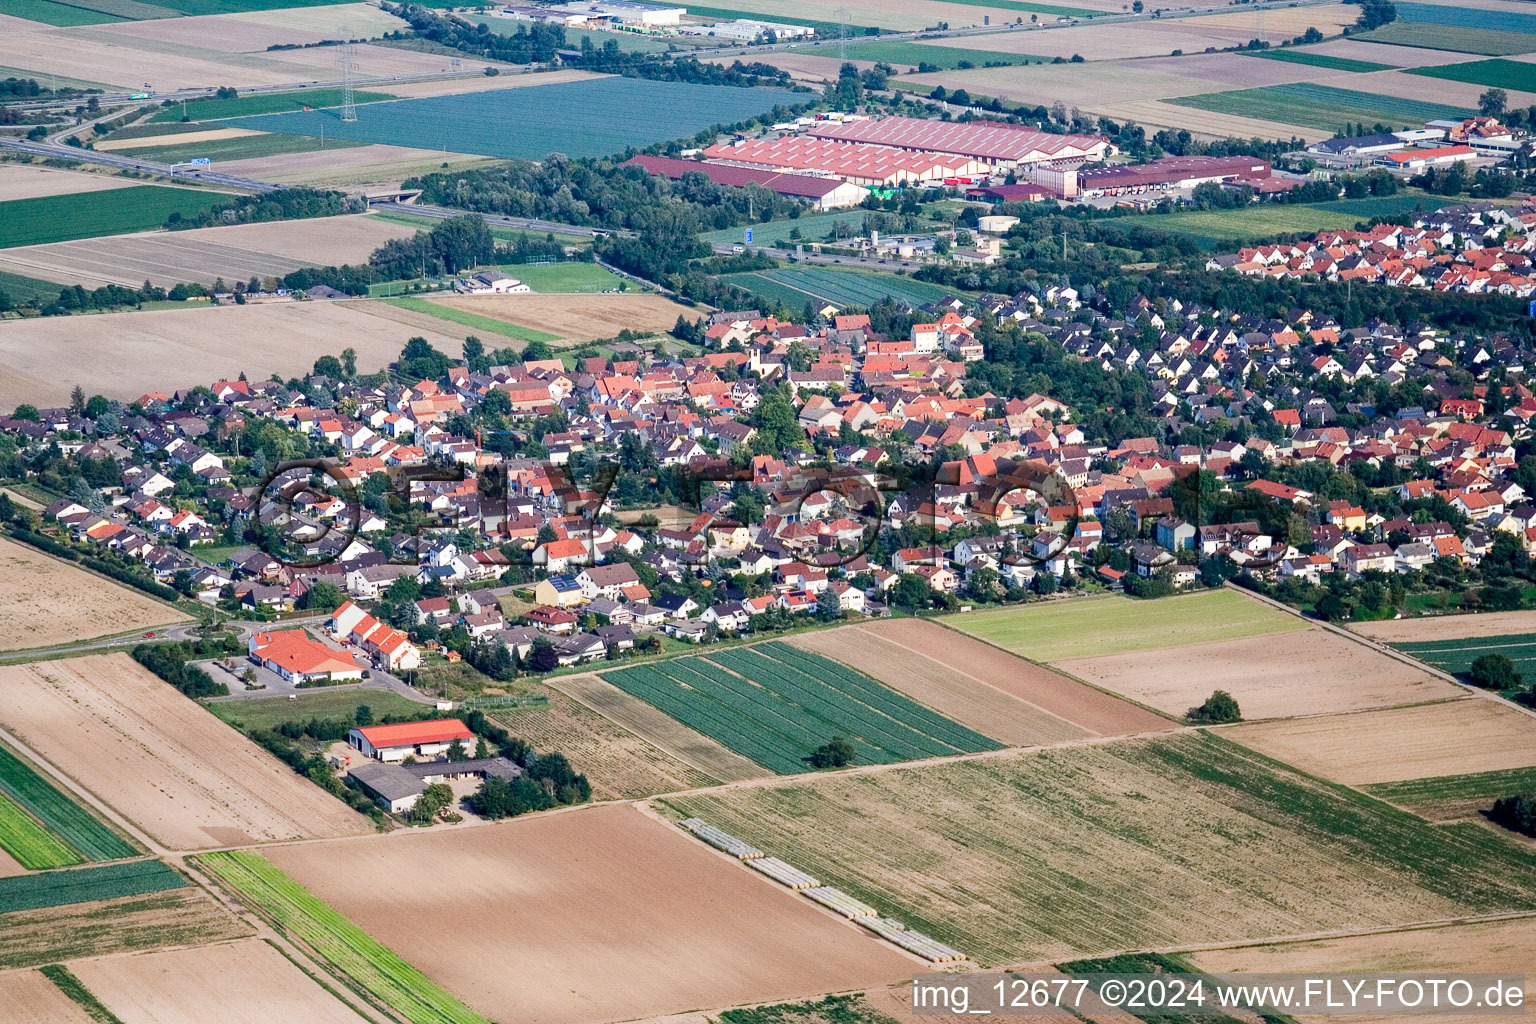 Aerial view of Town View of the streets and houses of the residential areas in the district Schauernheim in Dannstadt-Schauernheim in the state Rhineland-Palatinate